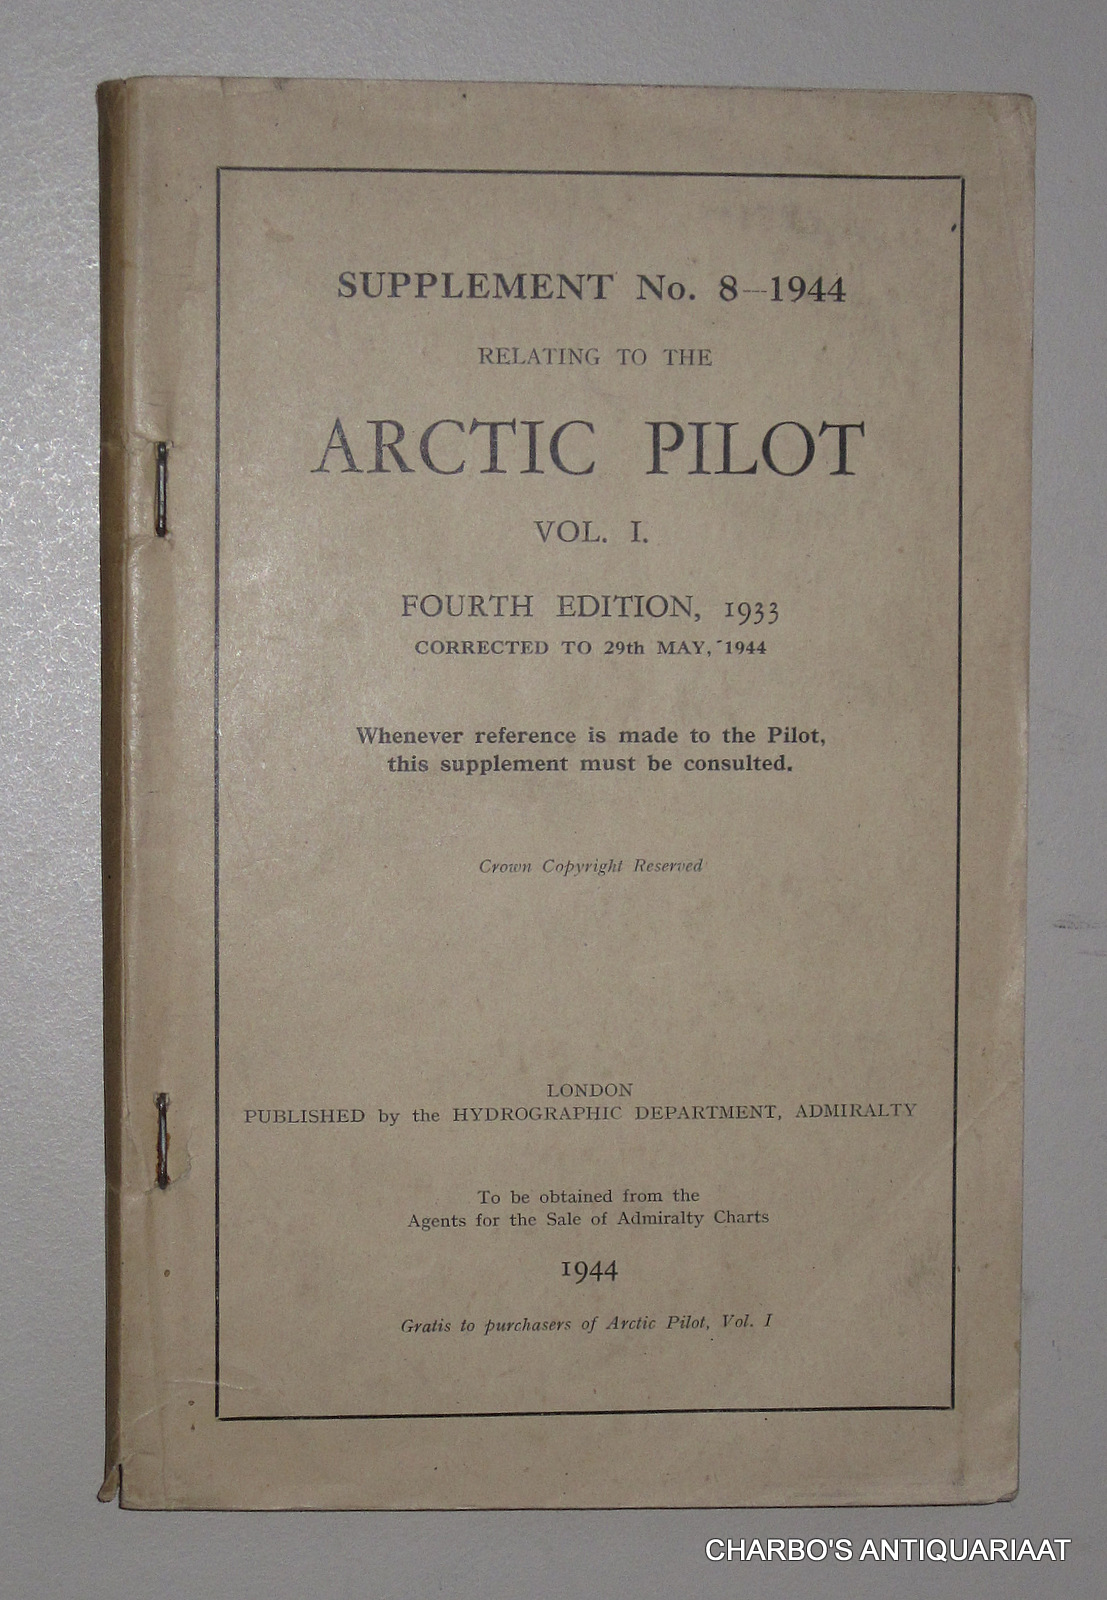 HYDROGRAPHIC DEPARTMENT, -  Supplement No. 8 - 1944 relating to the Arctic pilot vol. I. Fourth edition, 1933 corrected to 29th May, 1944.